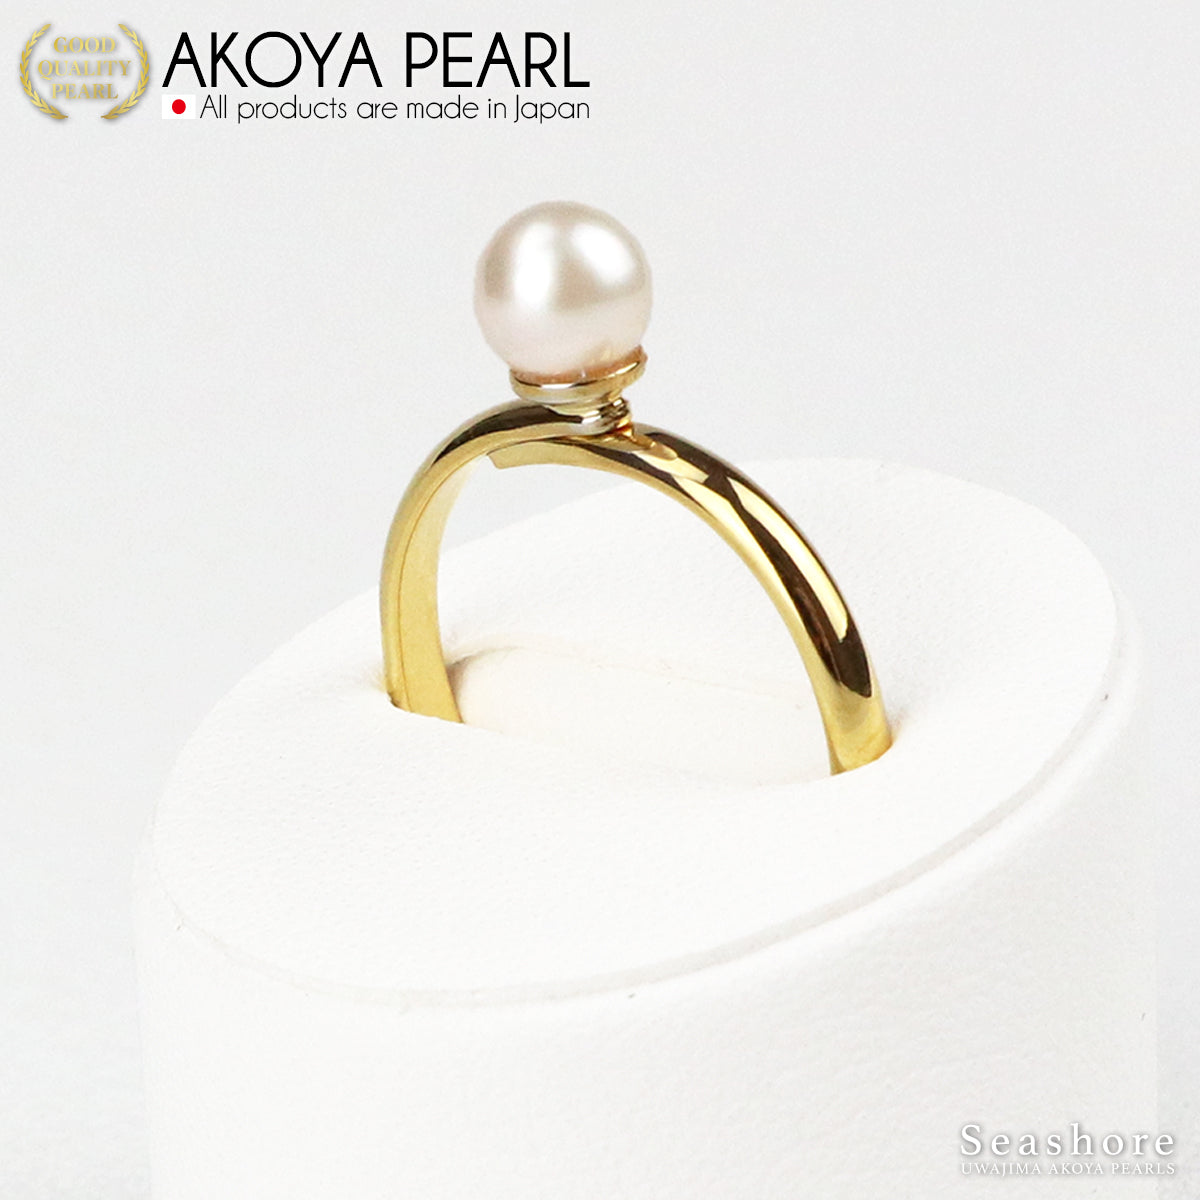 Baby Pearl Petit Pearl Ring 5.0-6.0mm White Brass Silver/Gold Free Size Akoya Pearl